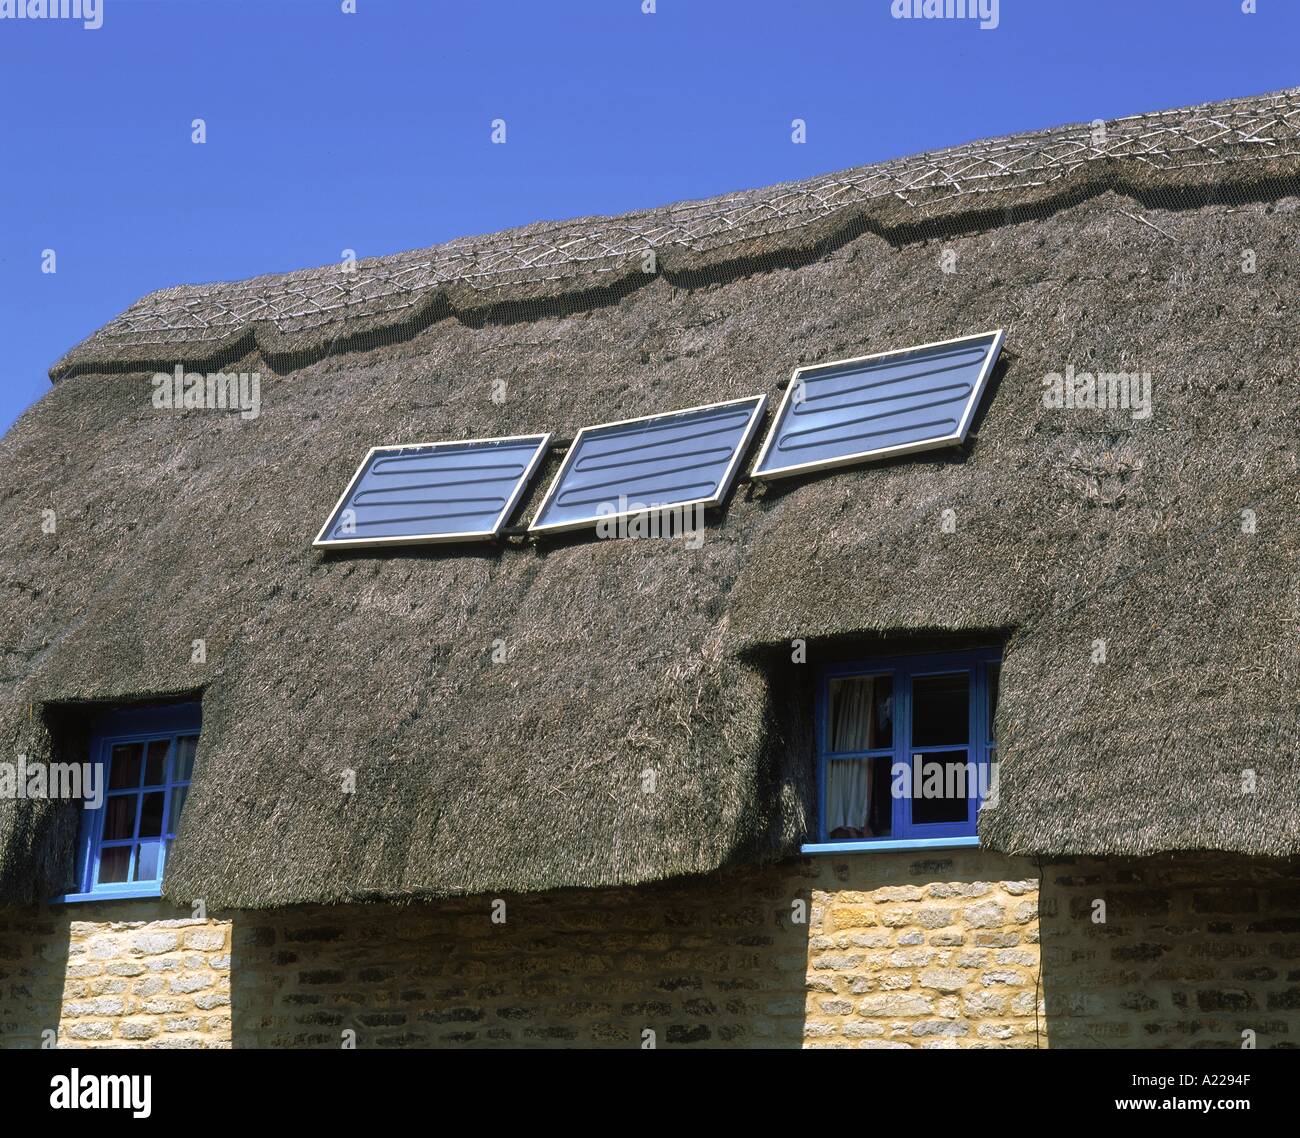 Solar water heating panels on a thatched roof N Francis Stock Photo